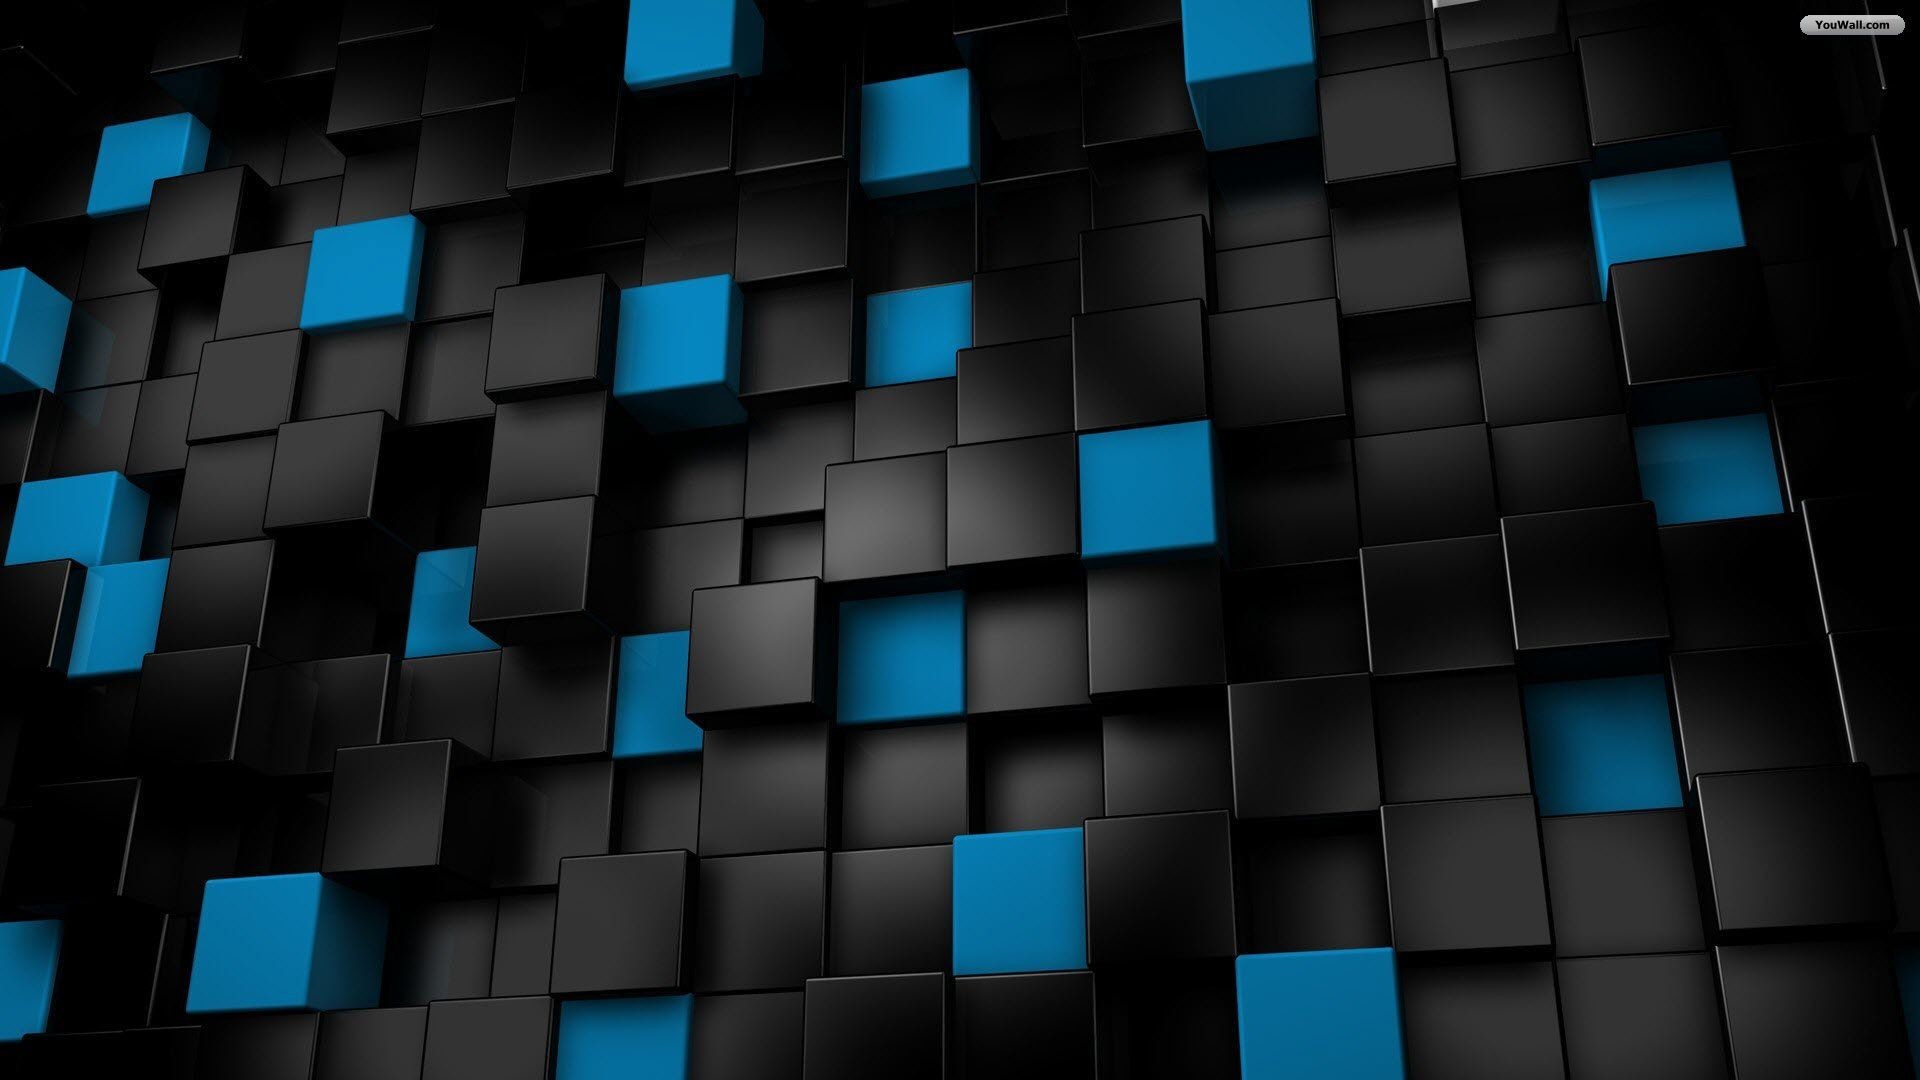 1920x1080 Download Black And Blue Cubes Wallpaper